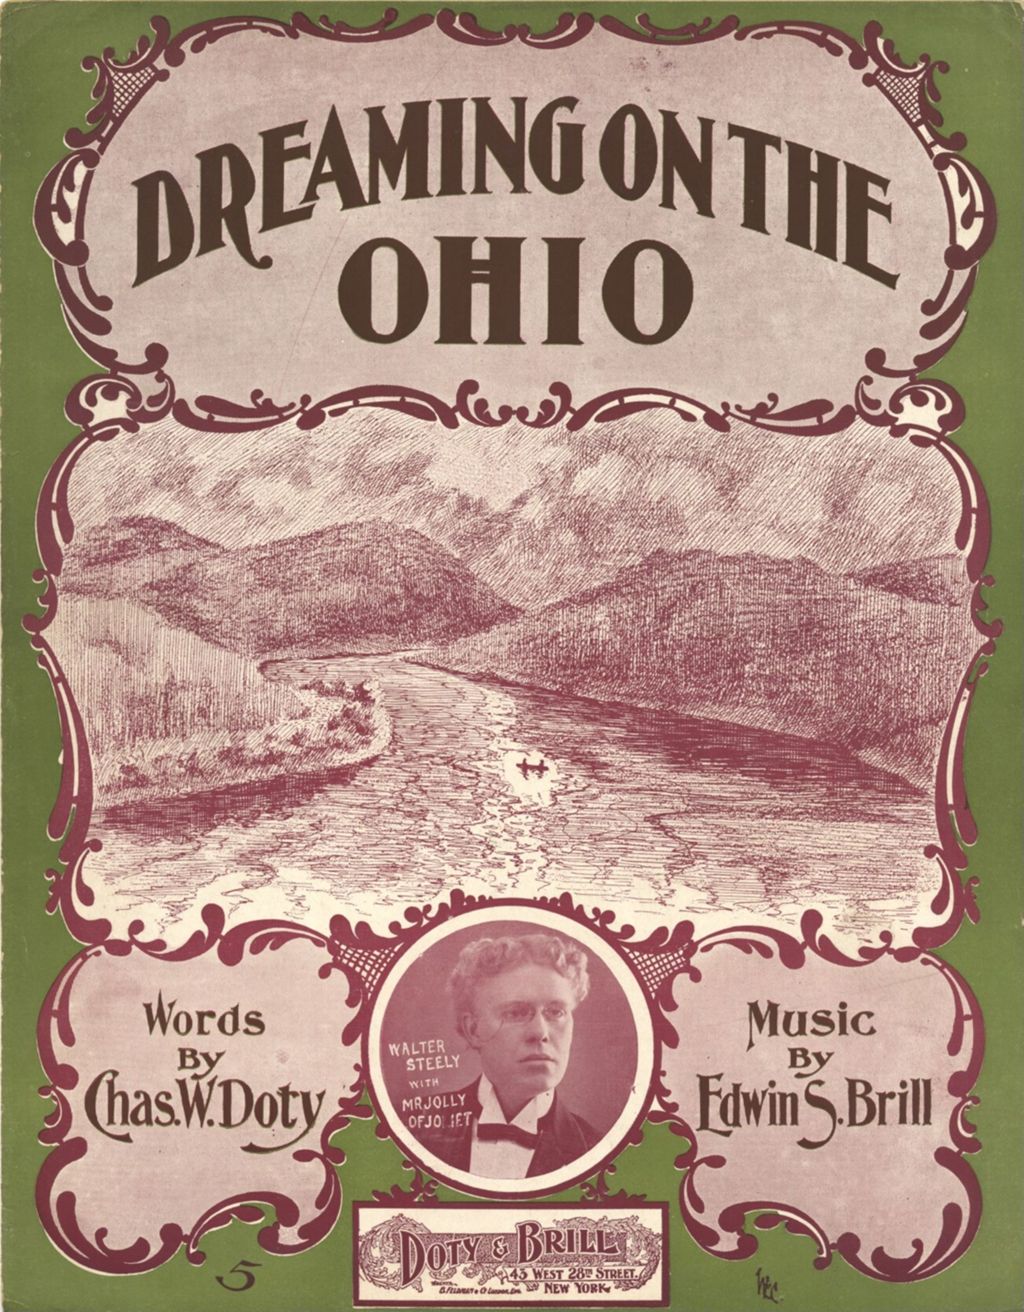 Dreaming on the Ohio